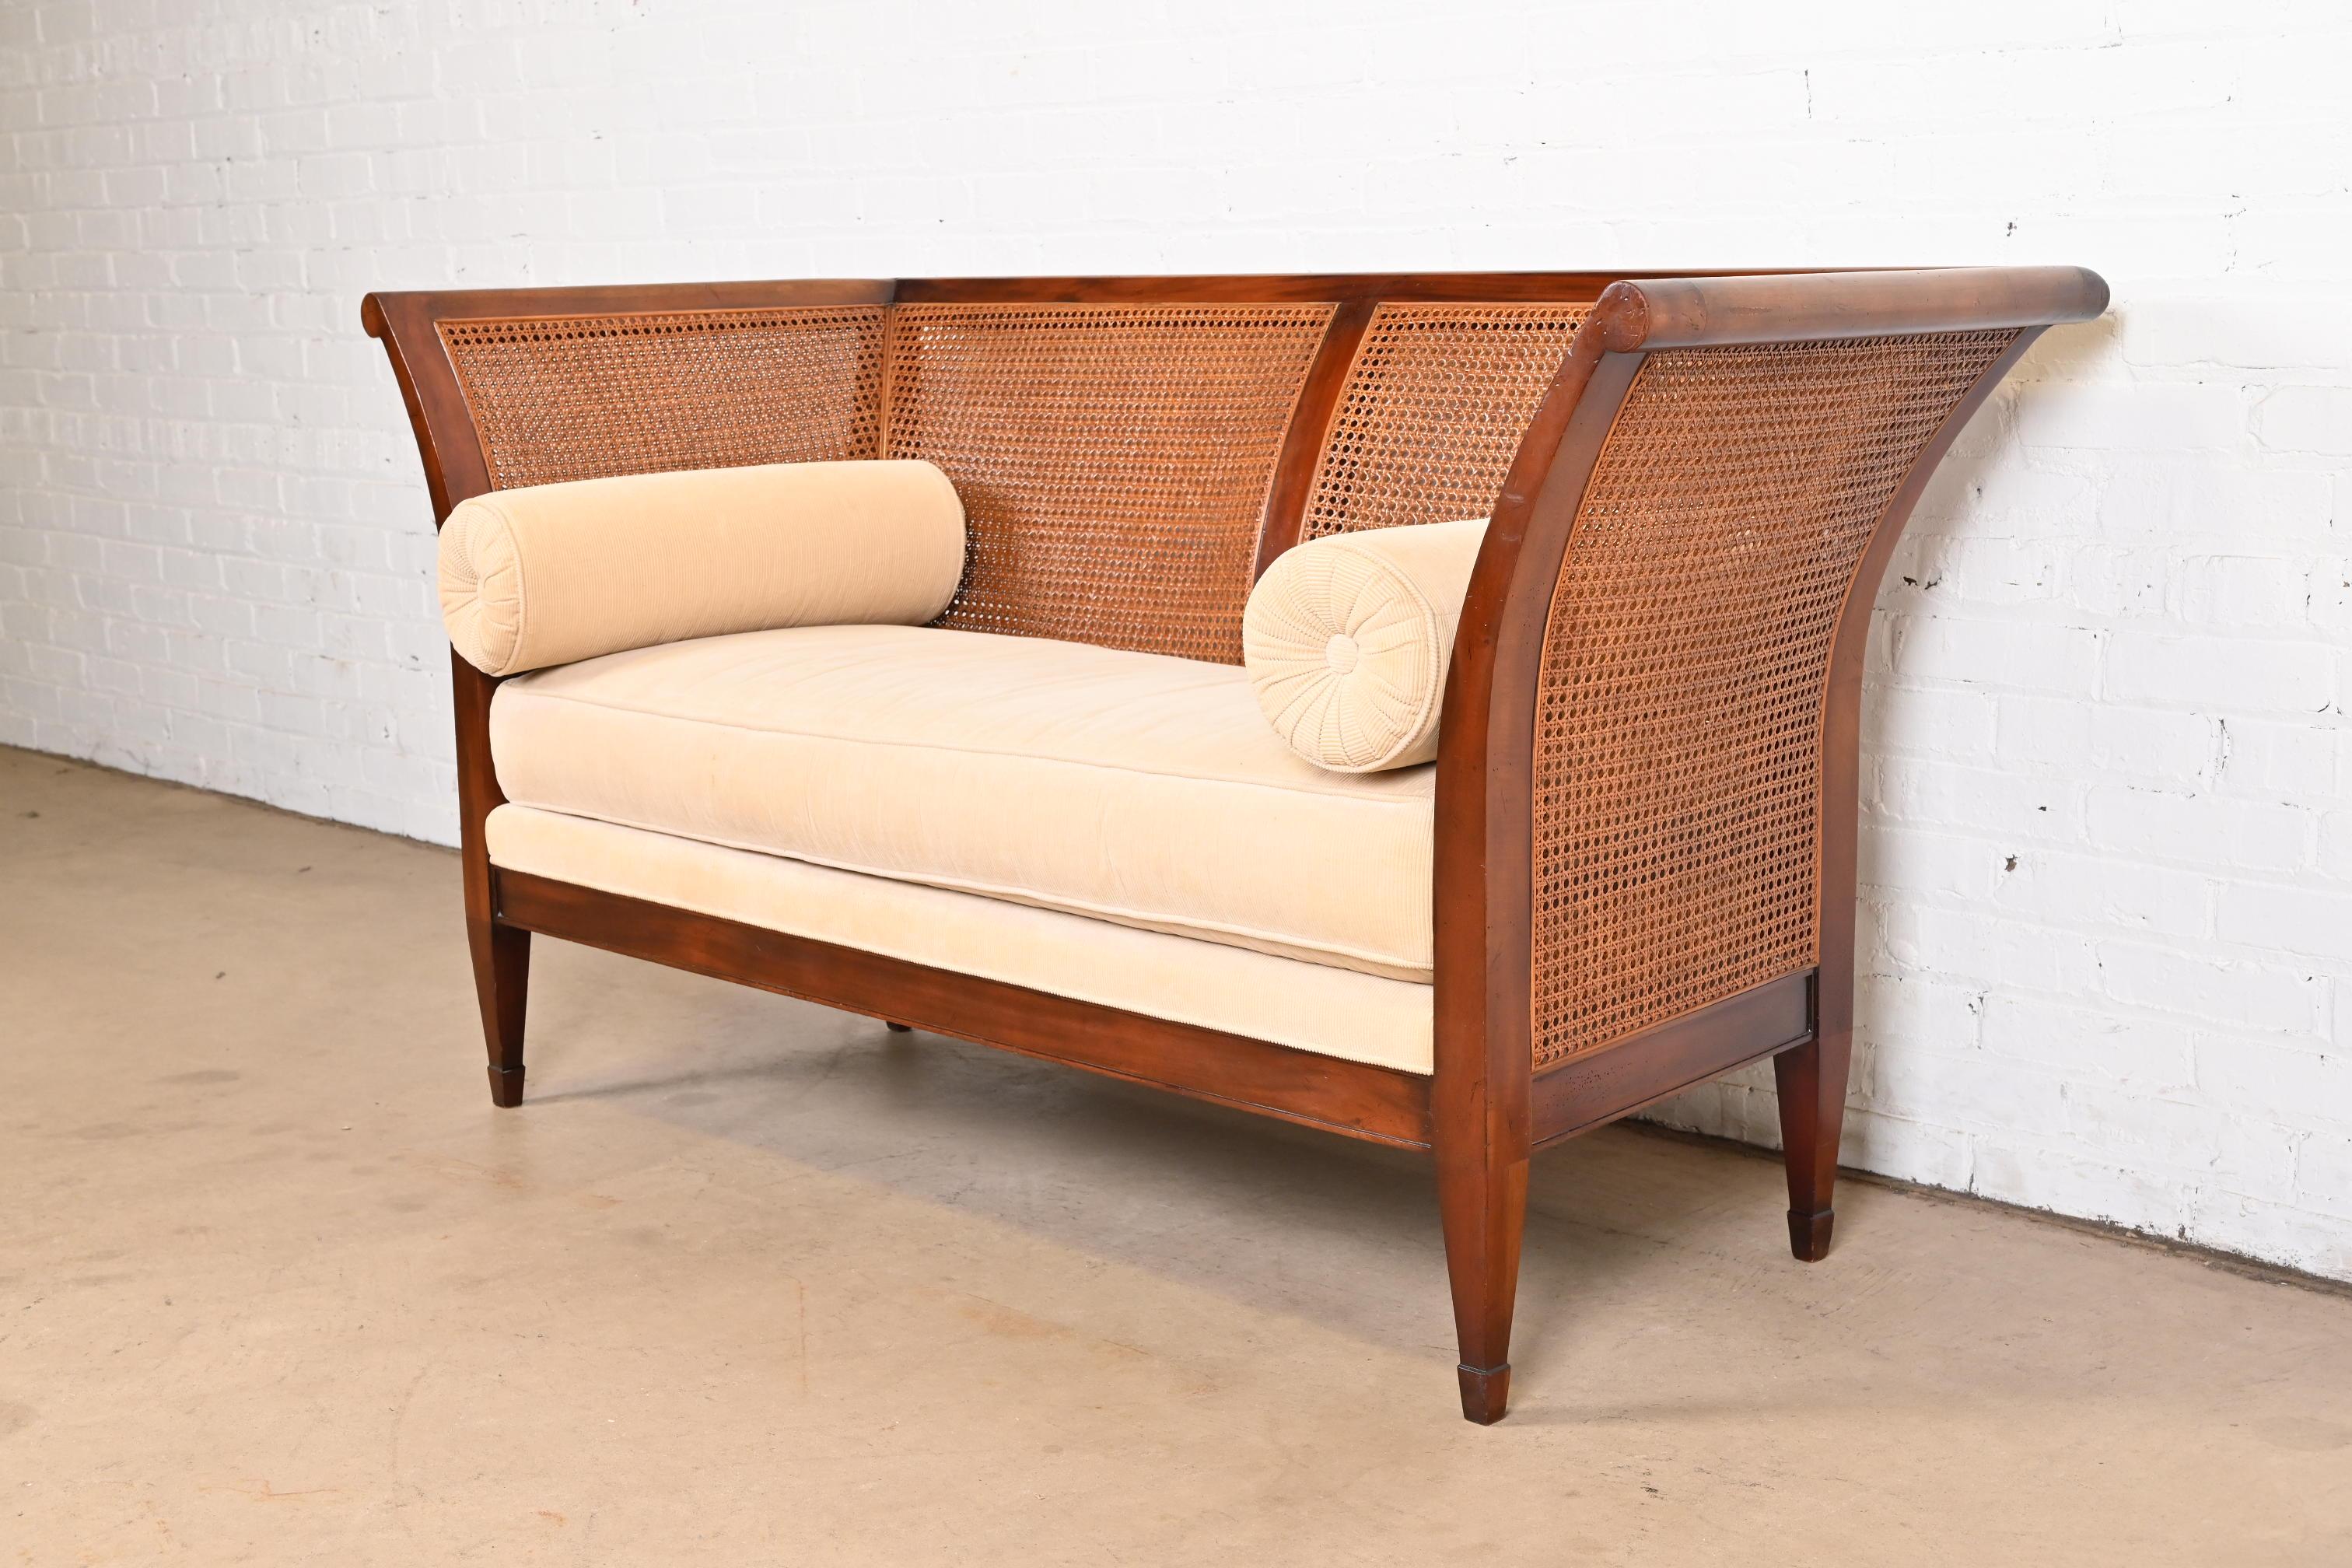 American Baker Furniture Regency Mahogany and Cane Settee